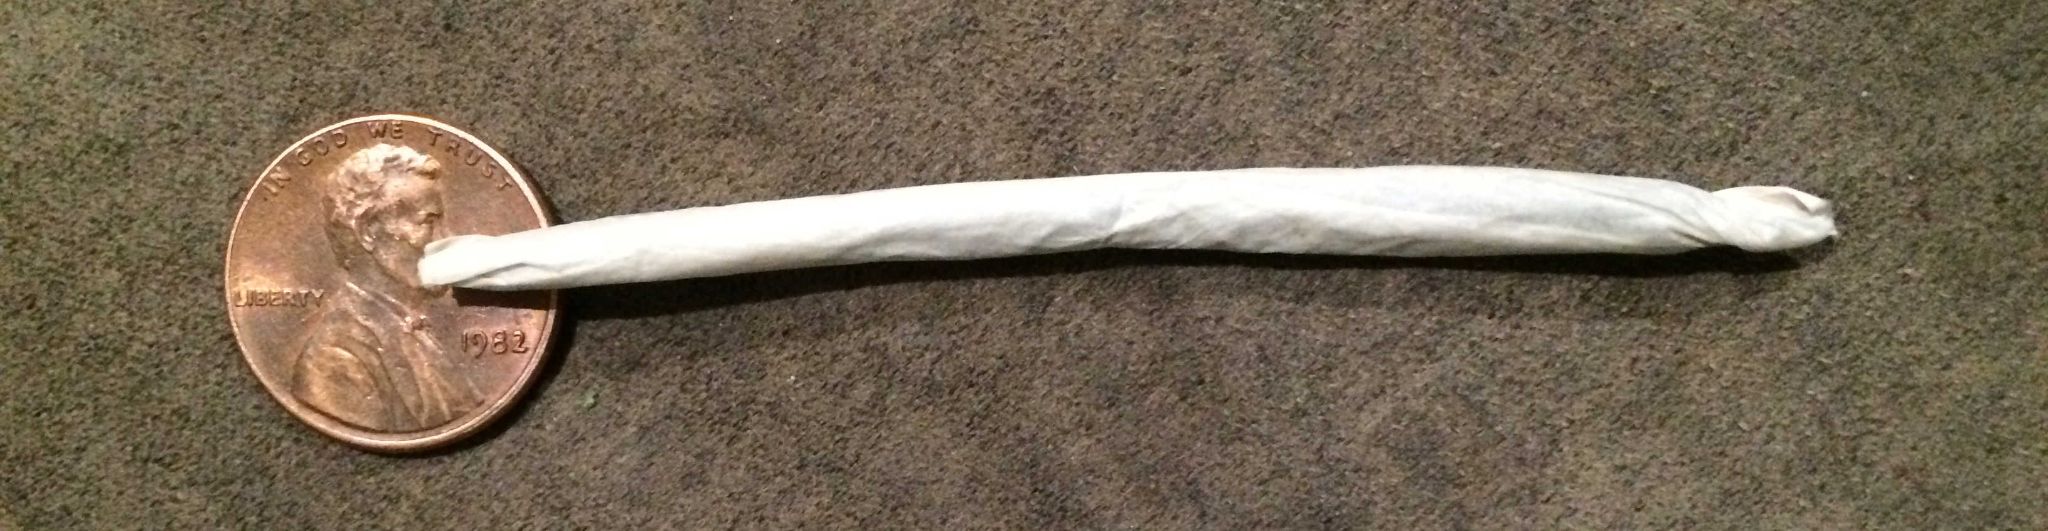 Learn to roll a pinner joint with Atomic Blaze Online Smoke Shop